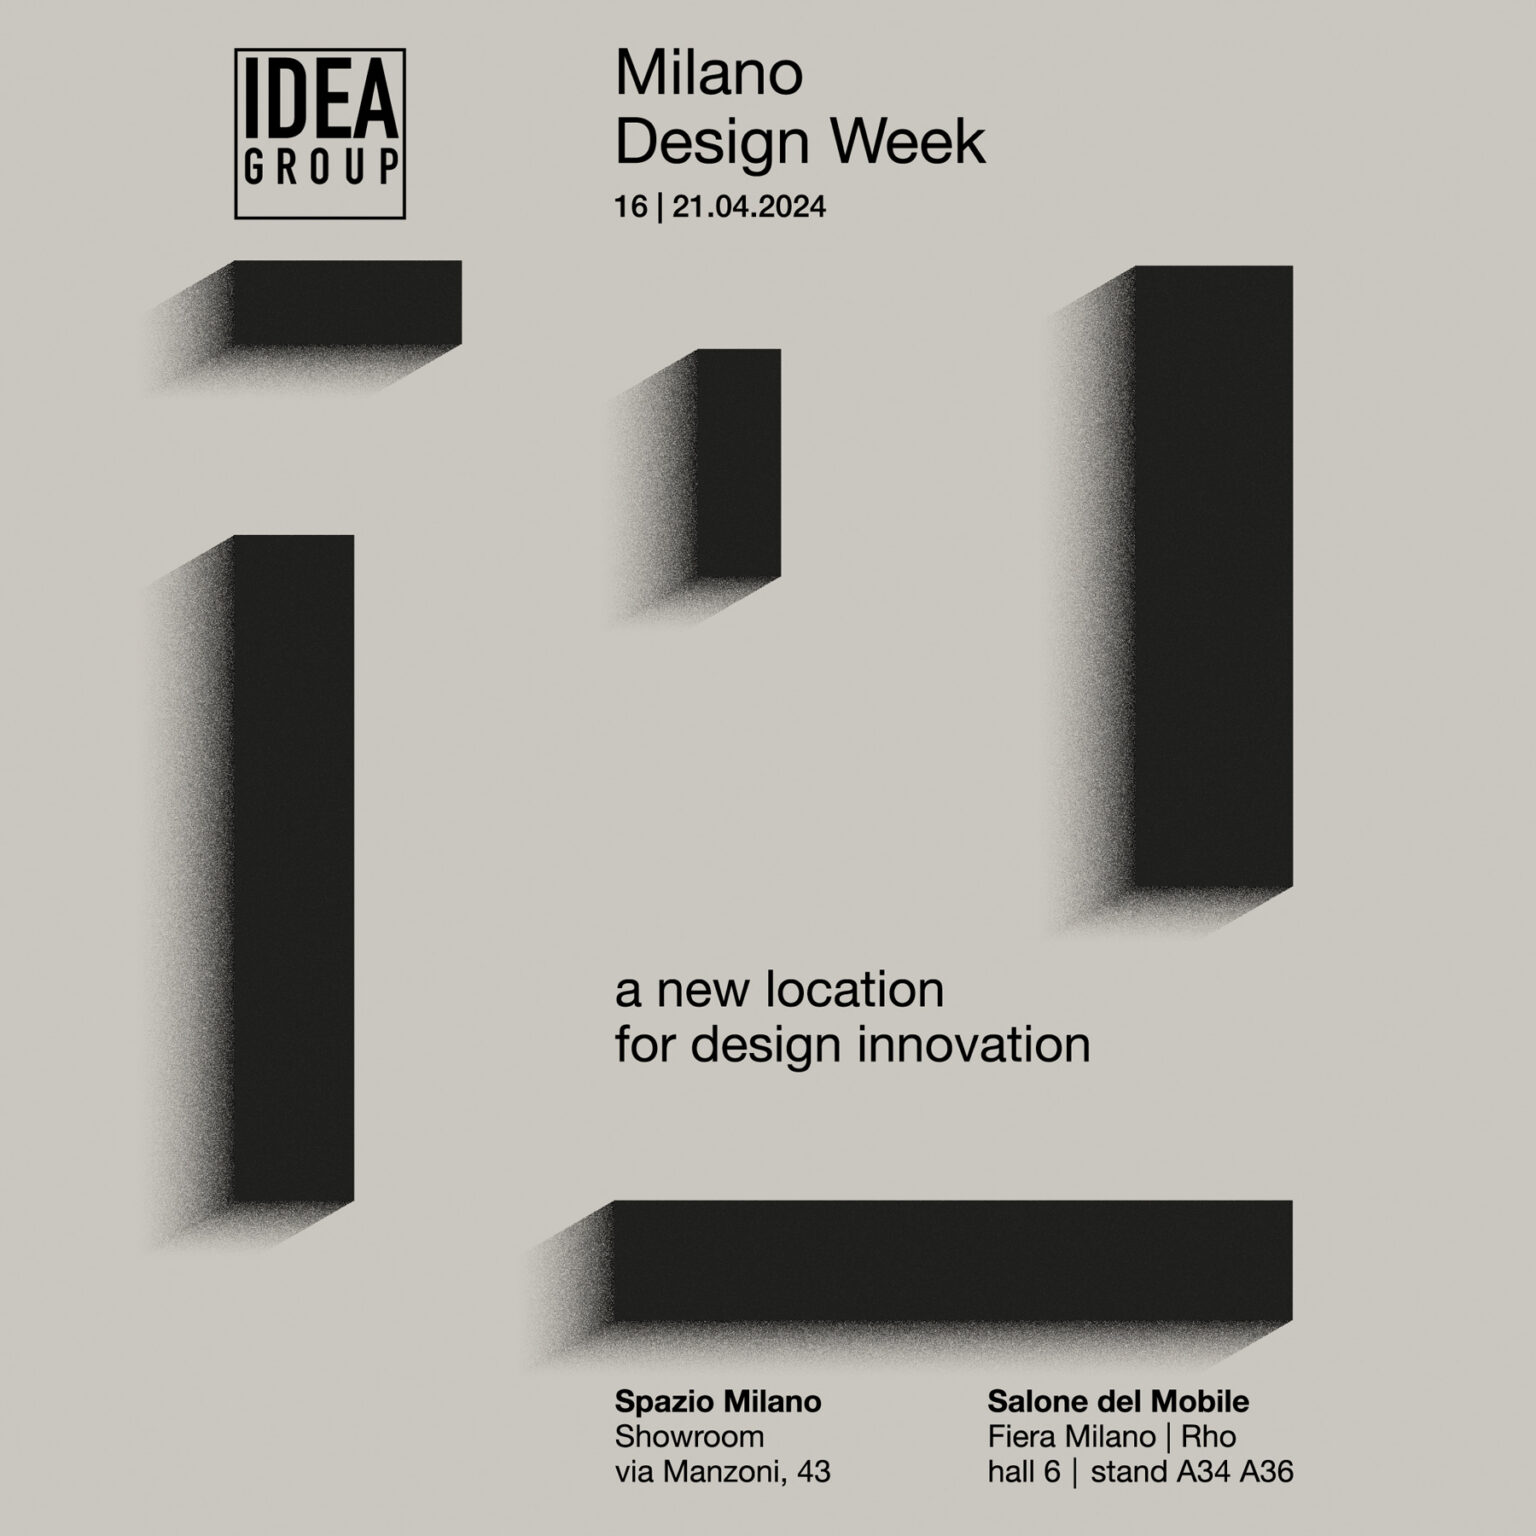 Milano Design Week 2024: a new location for design innovation